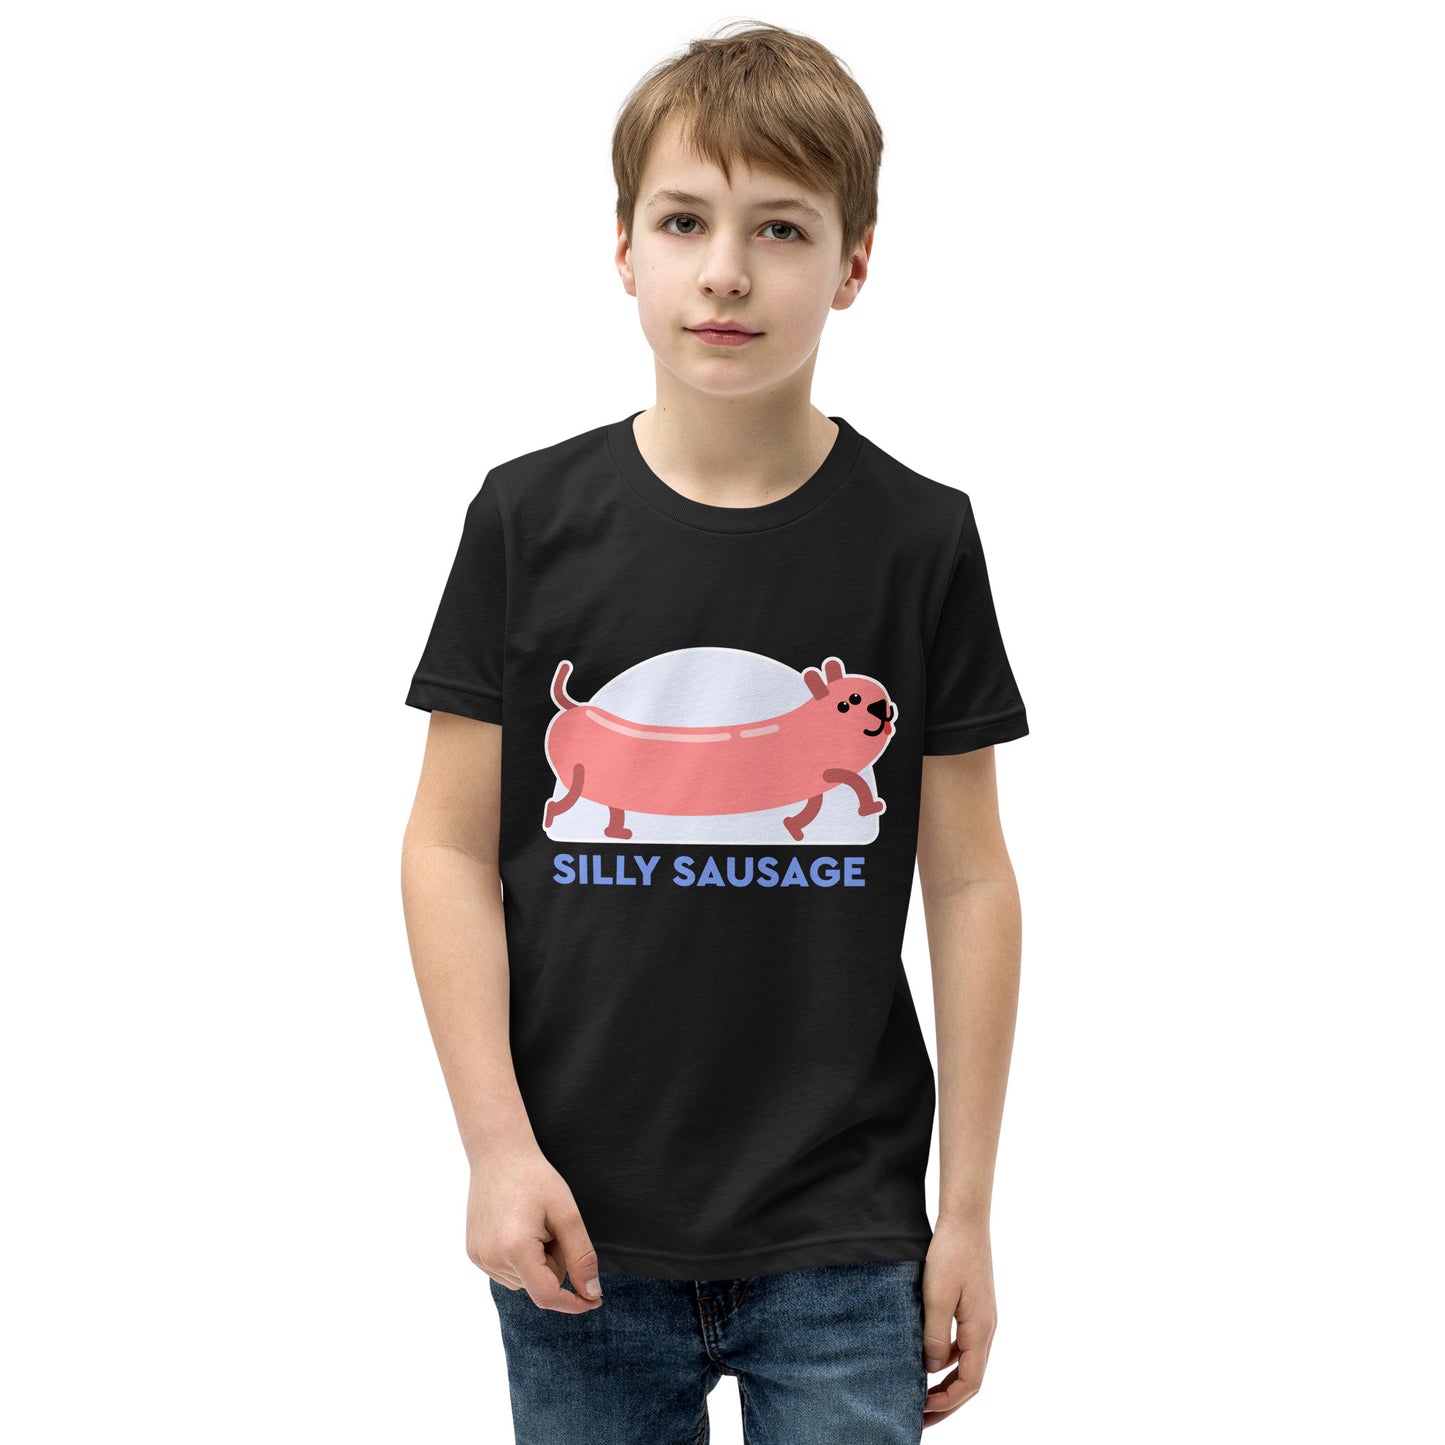 Kids - Silly Sausage - Short Sleeve T-Shirt